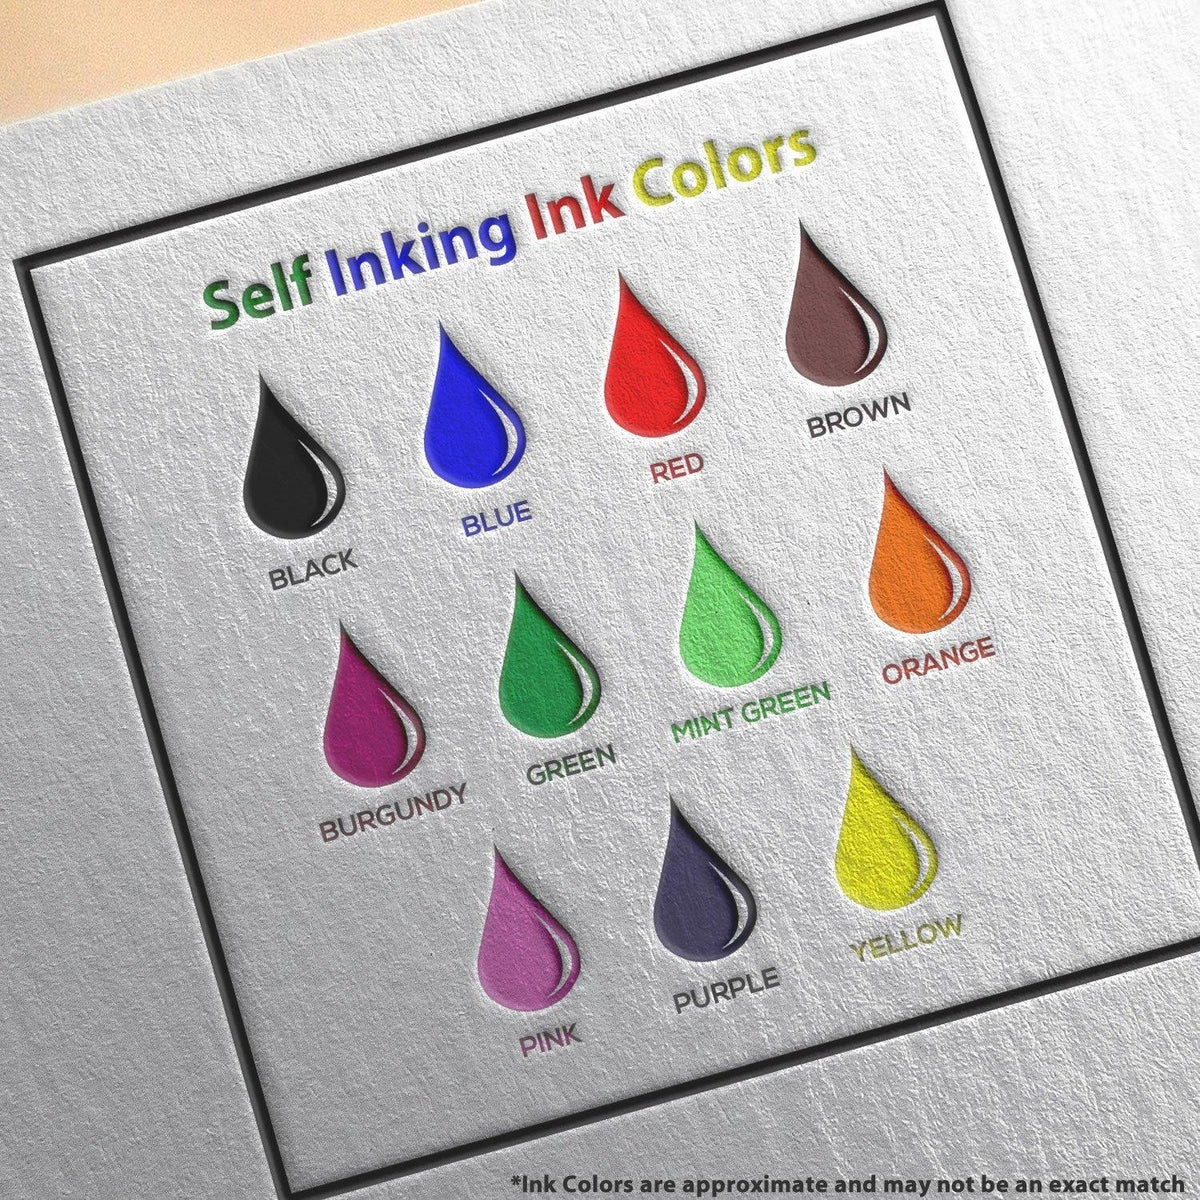 Self Inking Creditors Exhibit Stamp - Engineer Seal Stamps - Brand_Trodat, Impression Size_Small, Stamp Type_Self-Inking Stamp, Type of Use_Legal